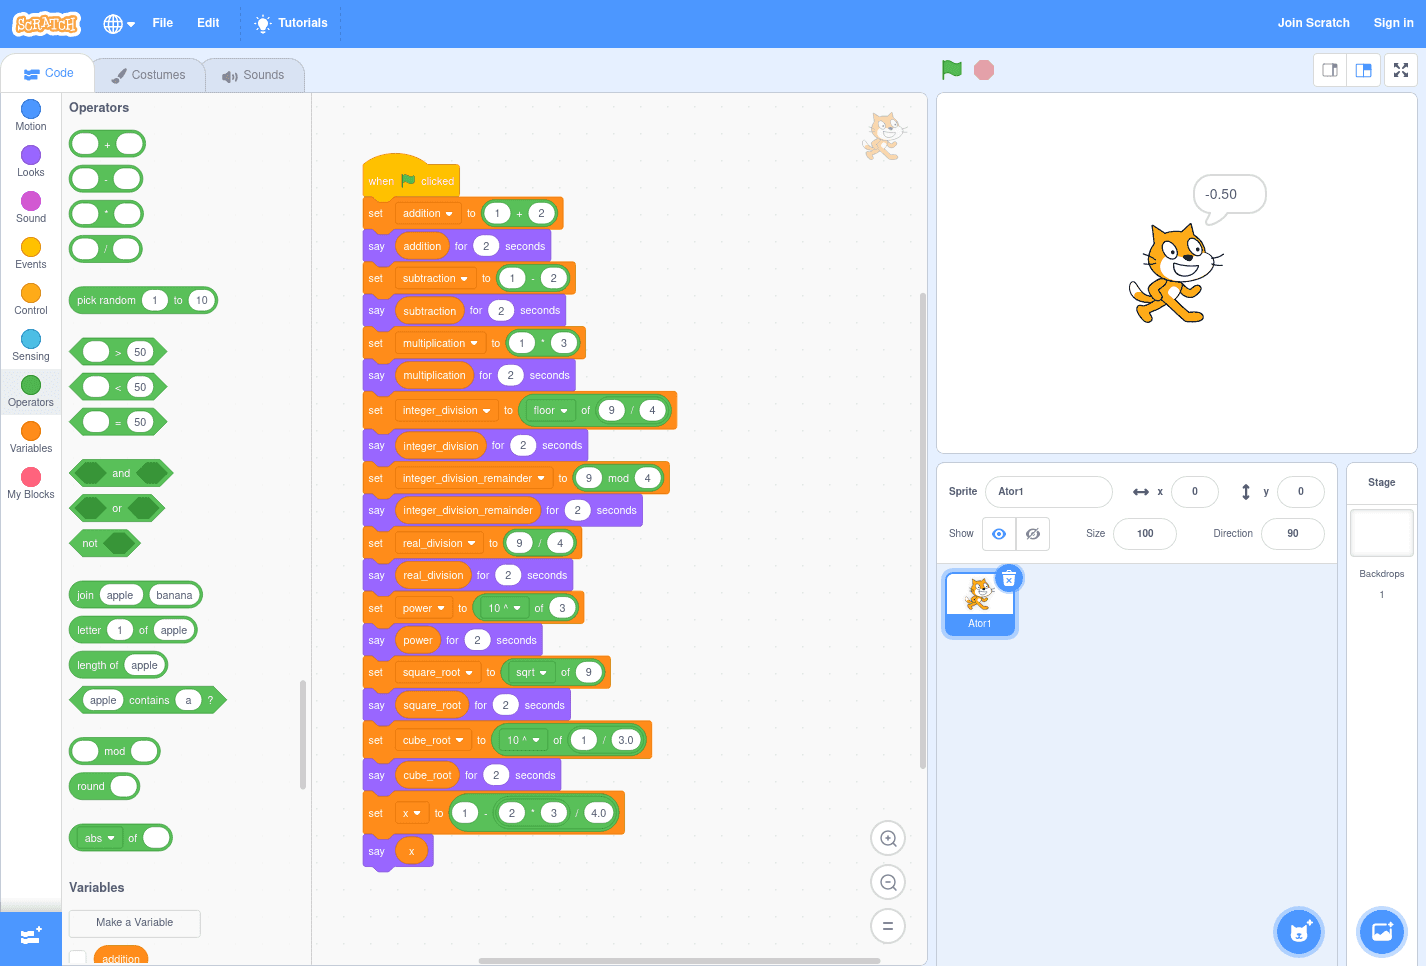 Example of basic arithmetic operations in Scratch: addition, subtraction, multiplication, integer division, integer division remainder, real division, power, square root, cube root and calculus of an expression.